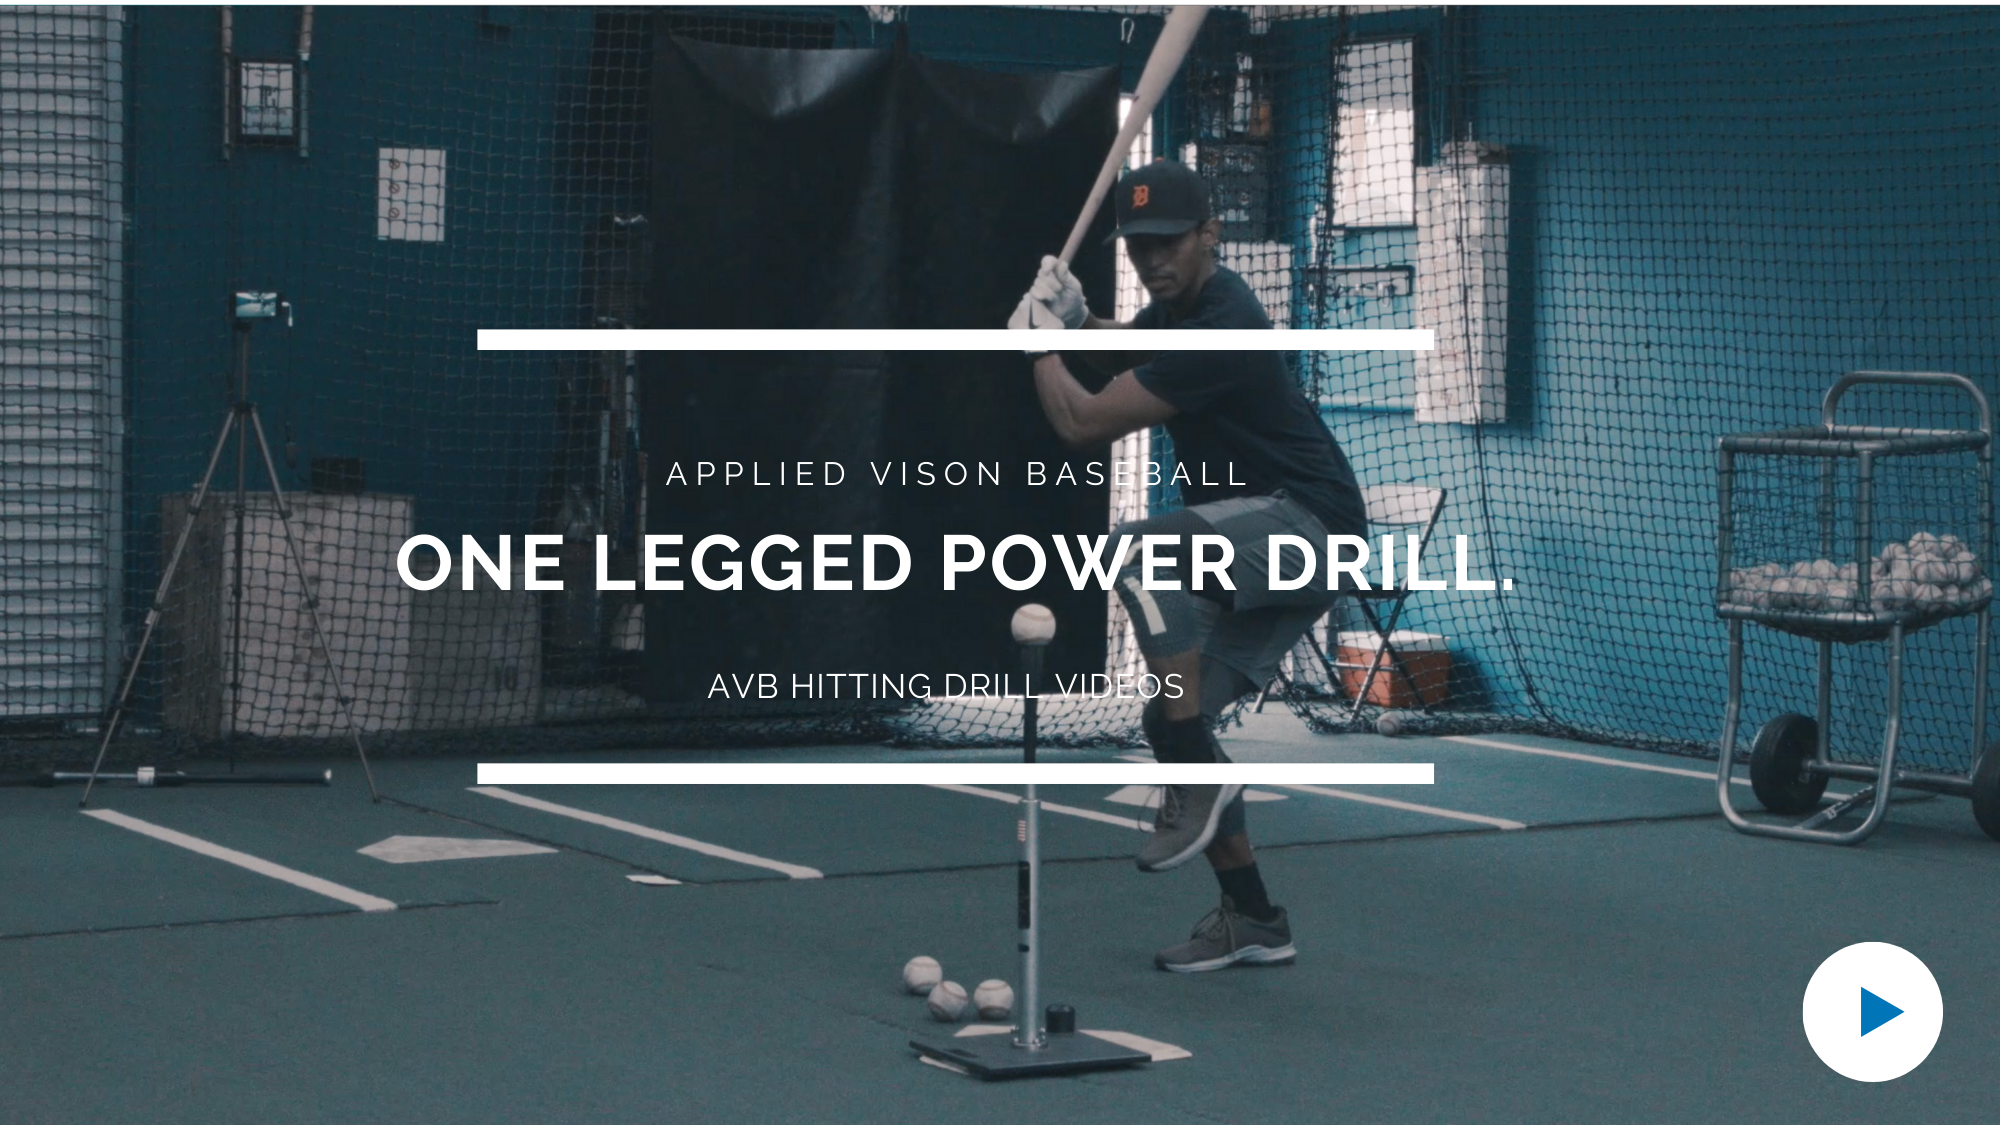 The One-Legged Power Drill: How To 3x Your Torque While Using Your Entire Body In Your Swing.